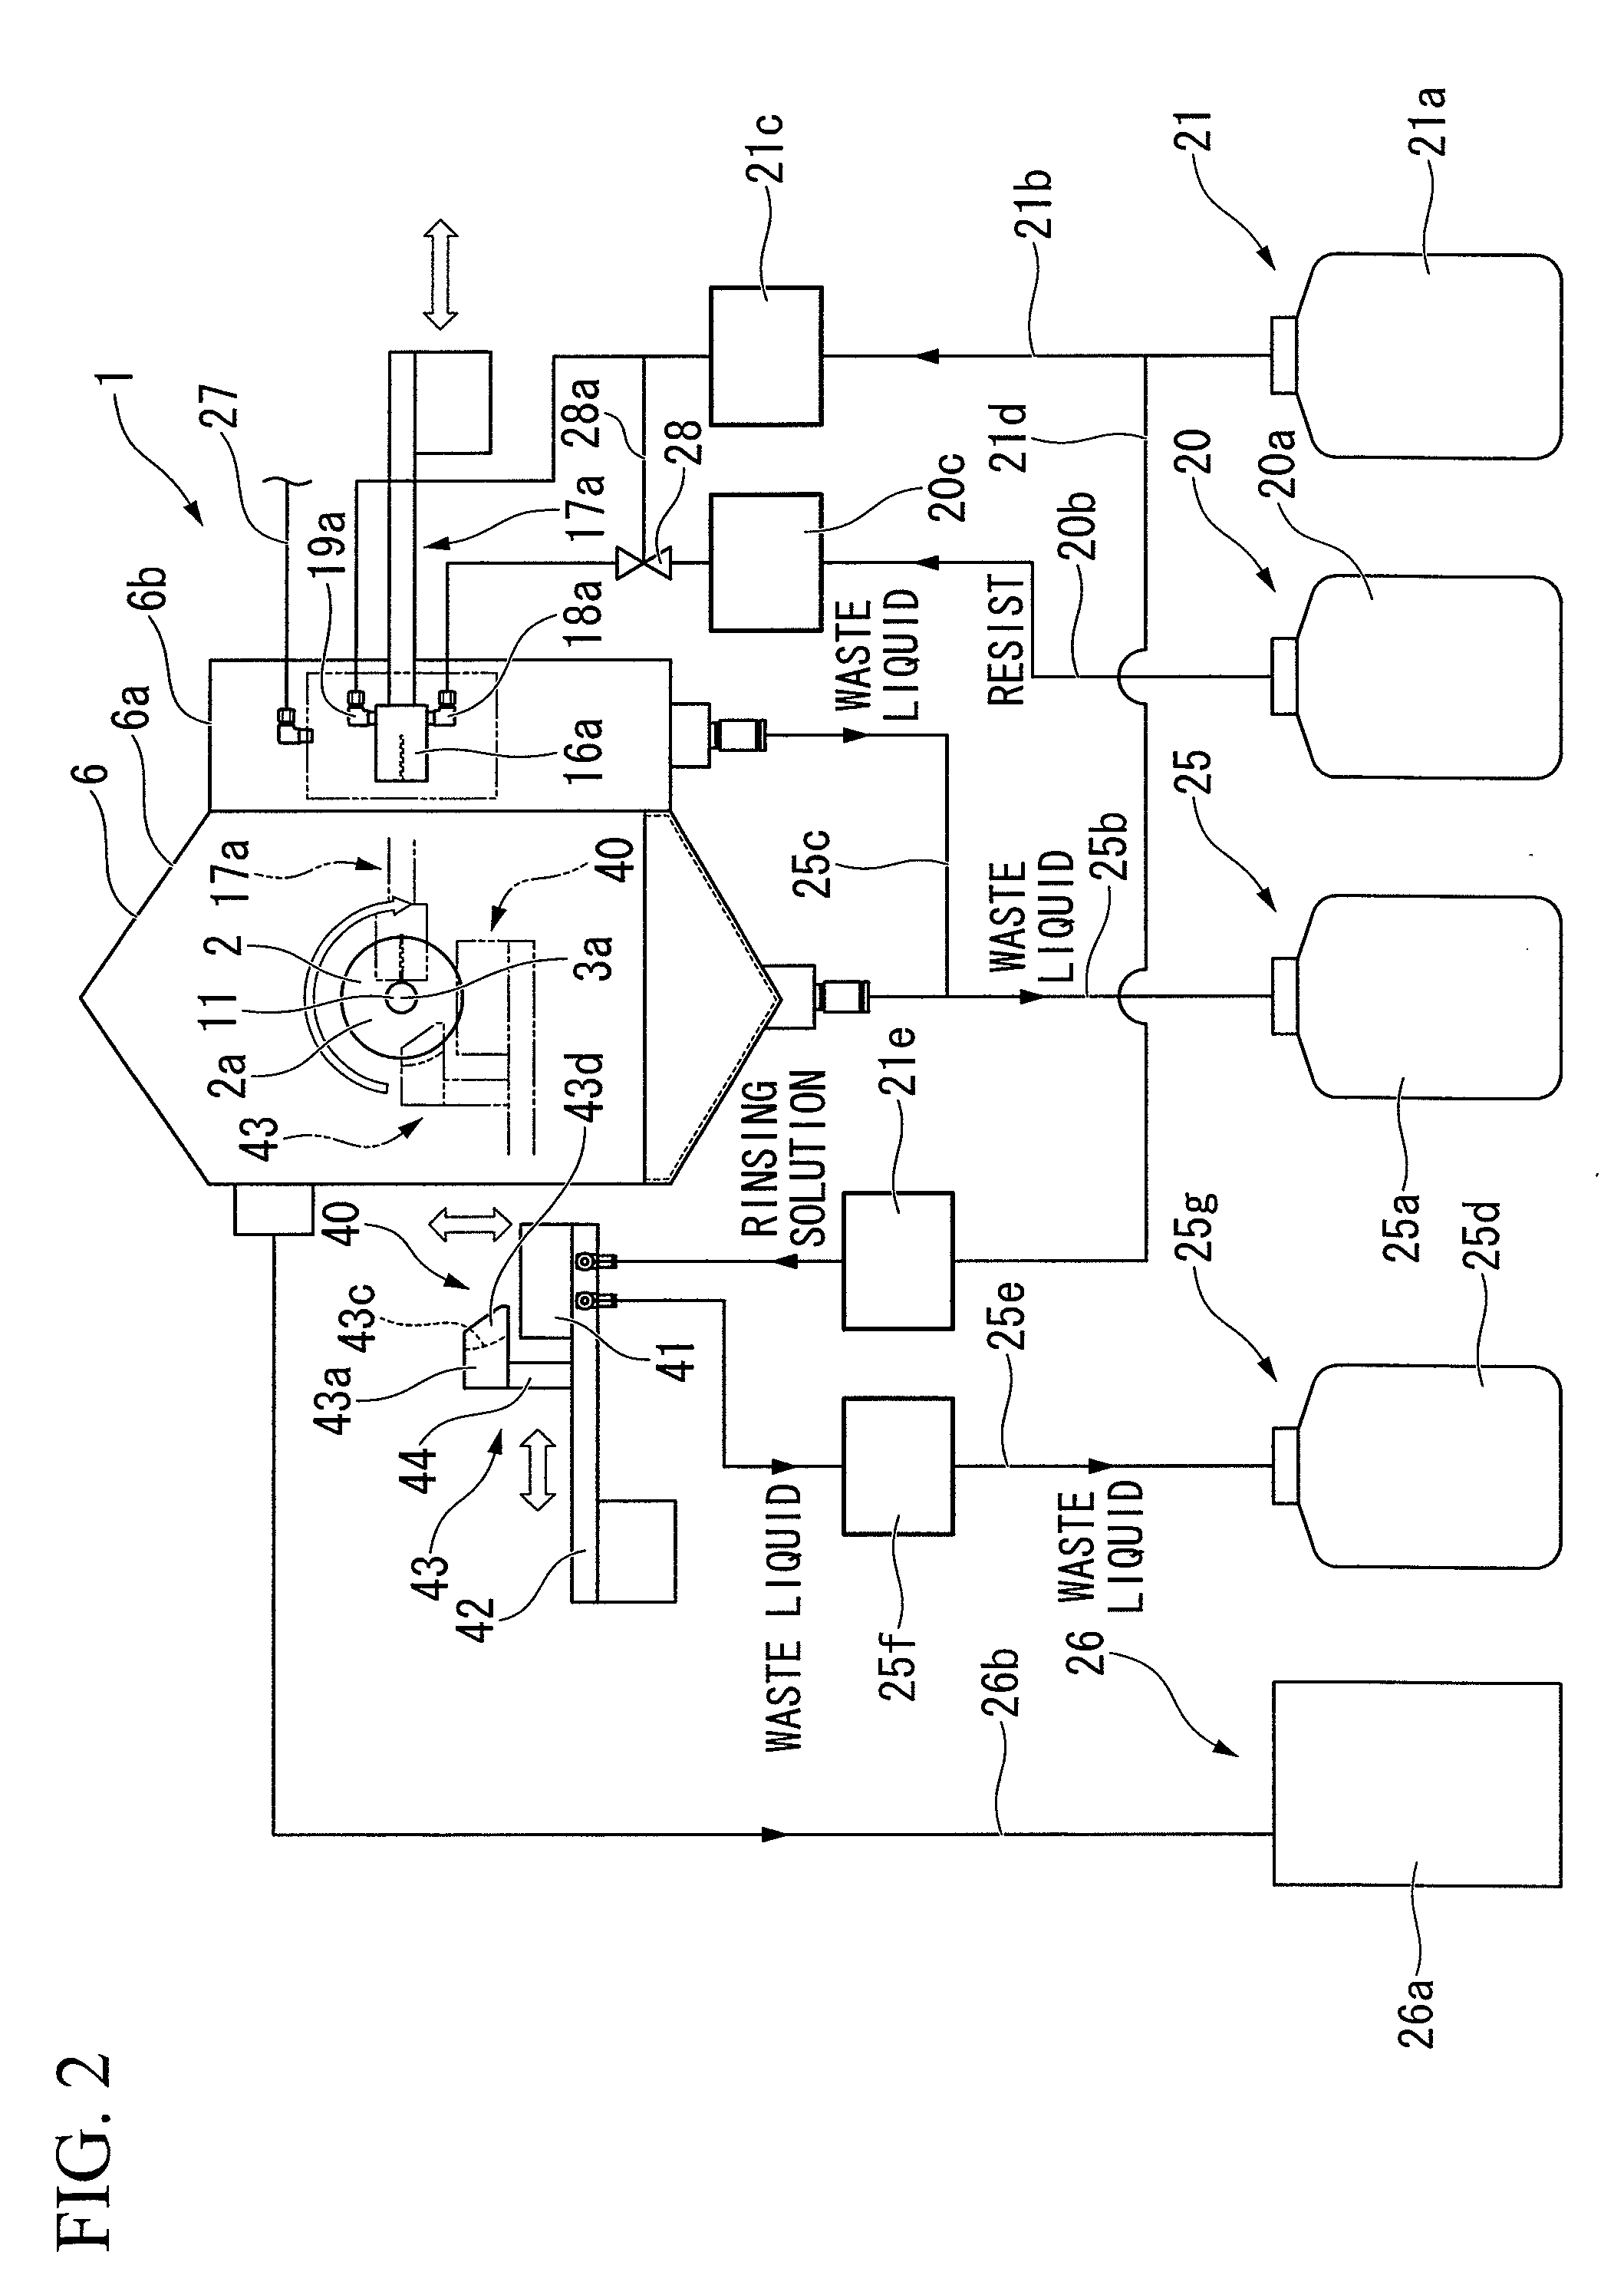 Double-side coating apparatus, method for coating double sides with coating solution,  edge rinsing apparatus, and  edge  rinsing method